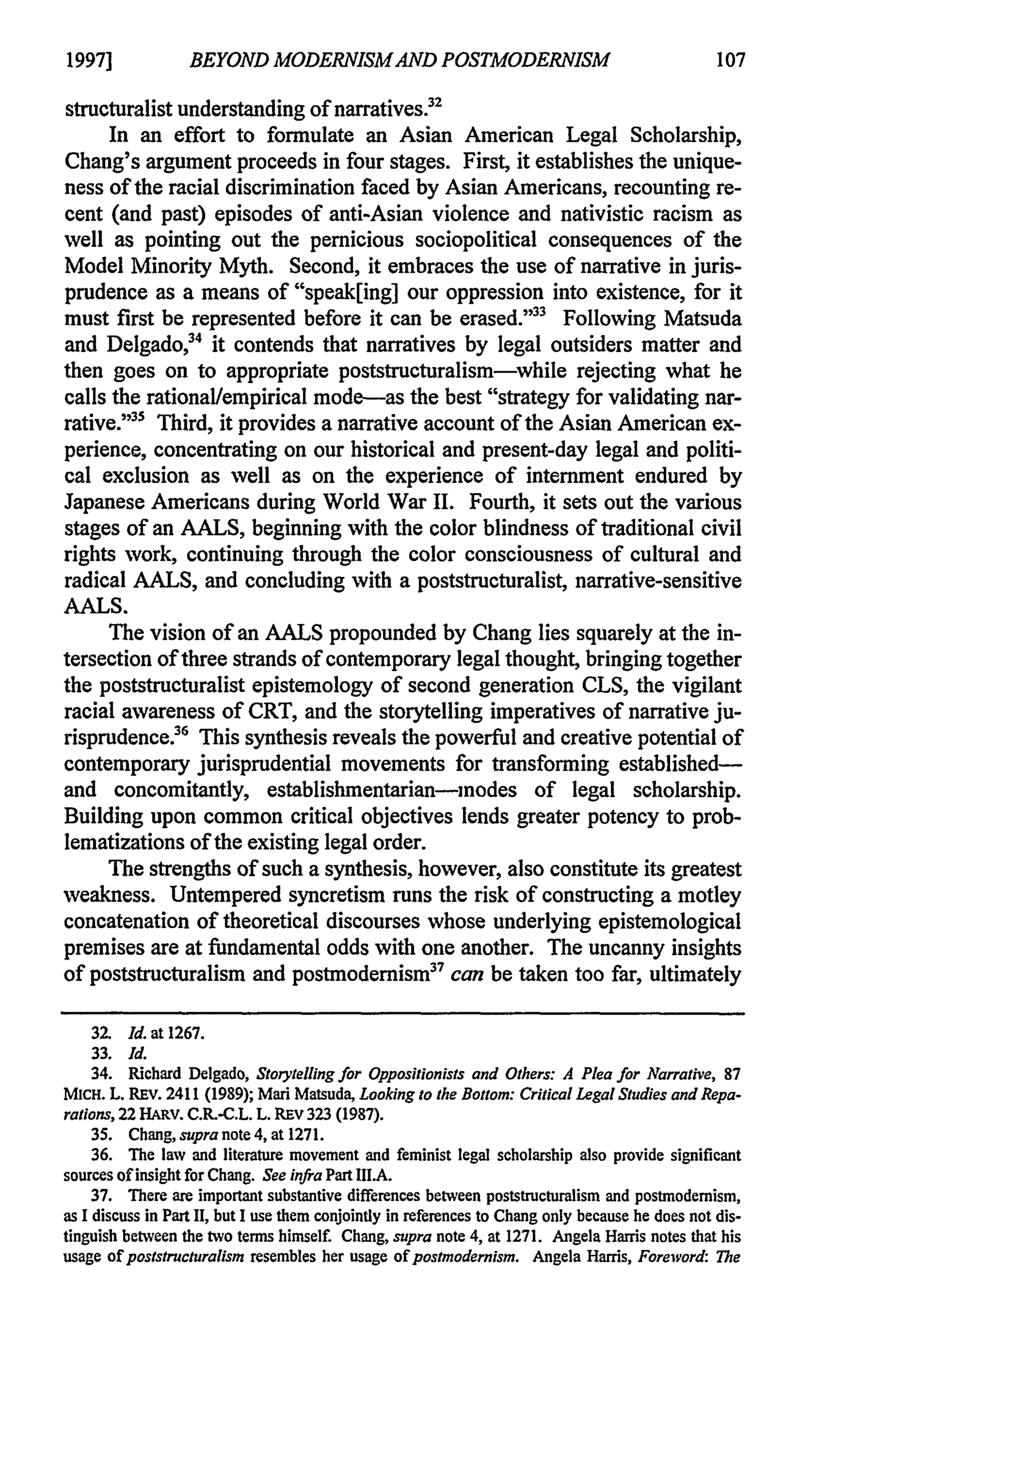 19971 BEYOND MODERNISMAND POSTMODERTISM structuralist understanding of narratives. 32 In an effort to formulate an Asian American Legal Scholarship, Chang's argument proceeds in four stages.